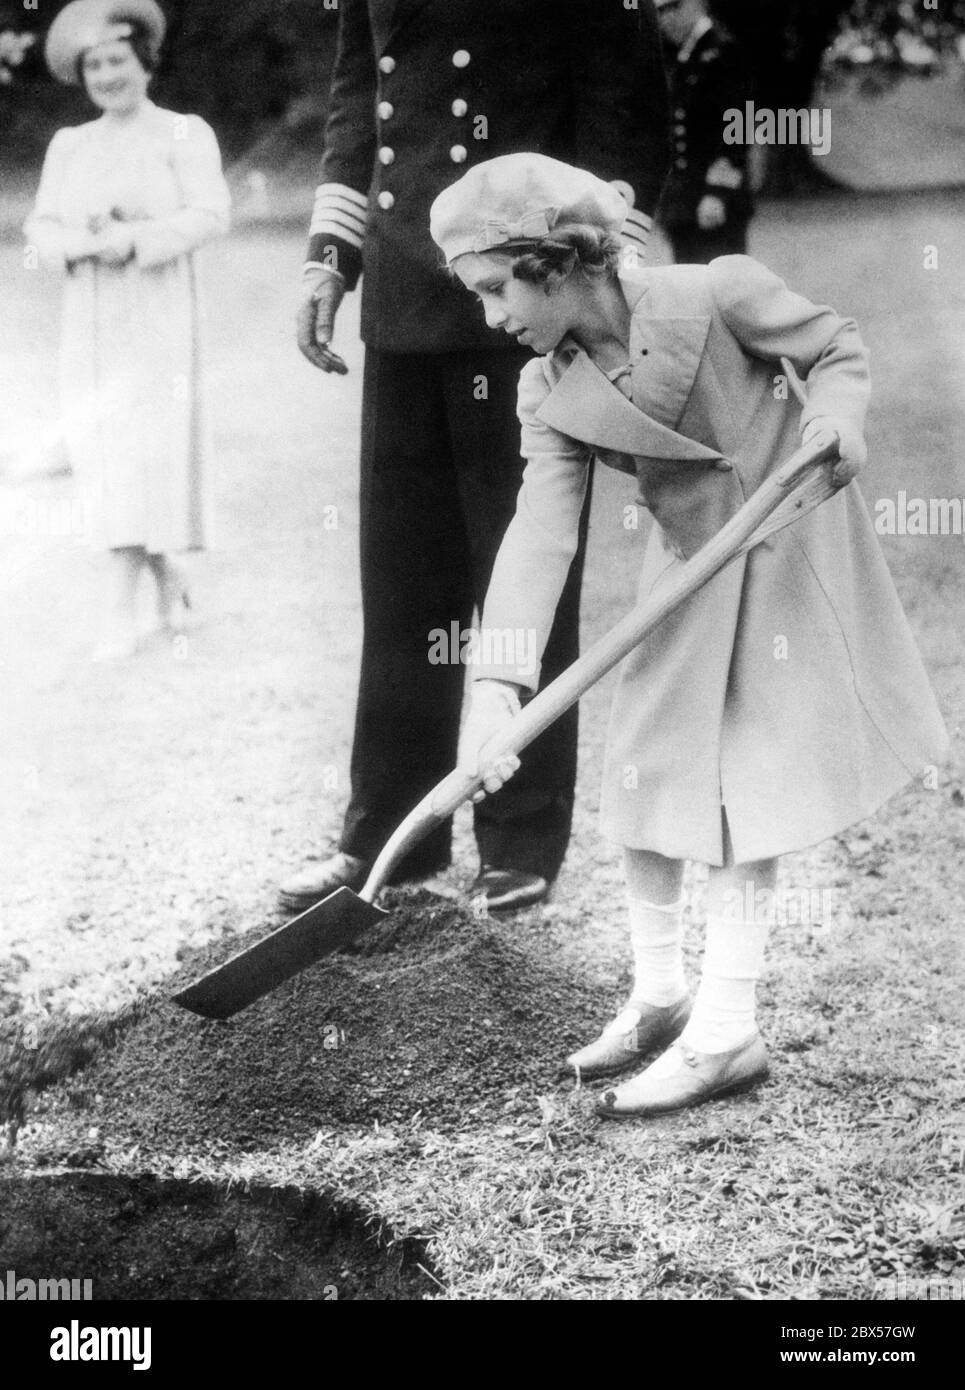 Princess Margaret digs a hole to plant a tree in front of the Royal Naval College at Dartmouth. In the background is her mother Elizabeth Bowes-Lyon. Stock Photo